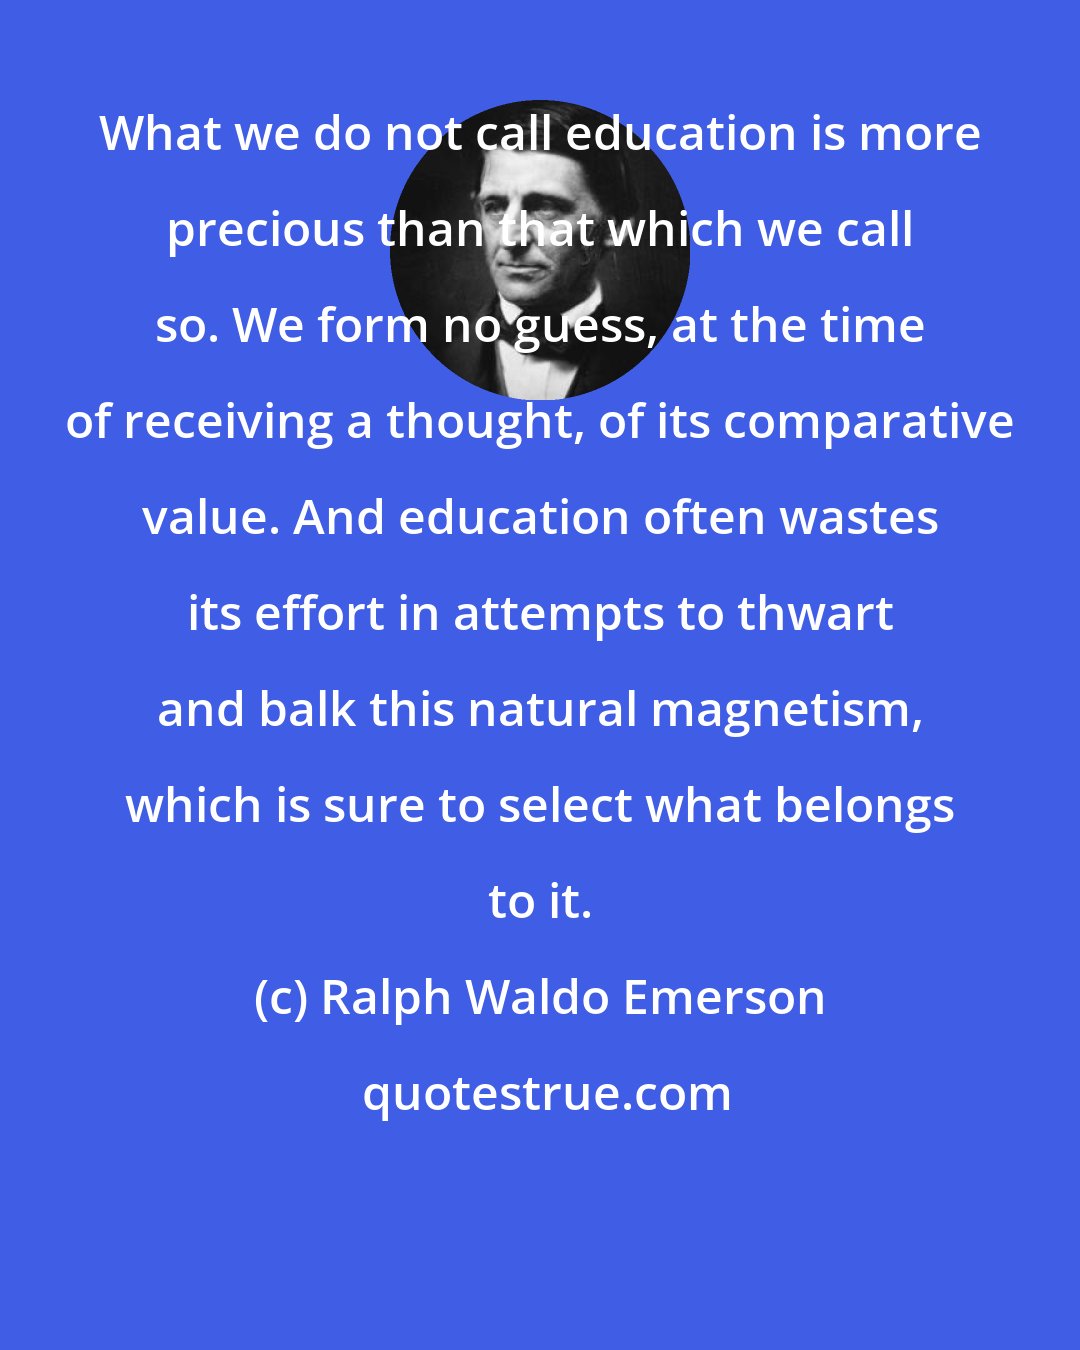 Ralph Waldo Emerson: What we do not call education is more precious than that which we call so. We form no guess, at the time of receiving a thought, of its comparative value. And education often wastes its effort in attempts to thwart and balk this natural magnetism, which is sure to select what belongs to it.